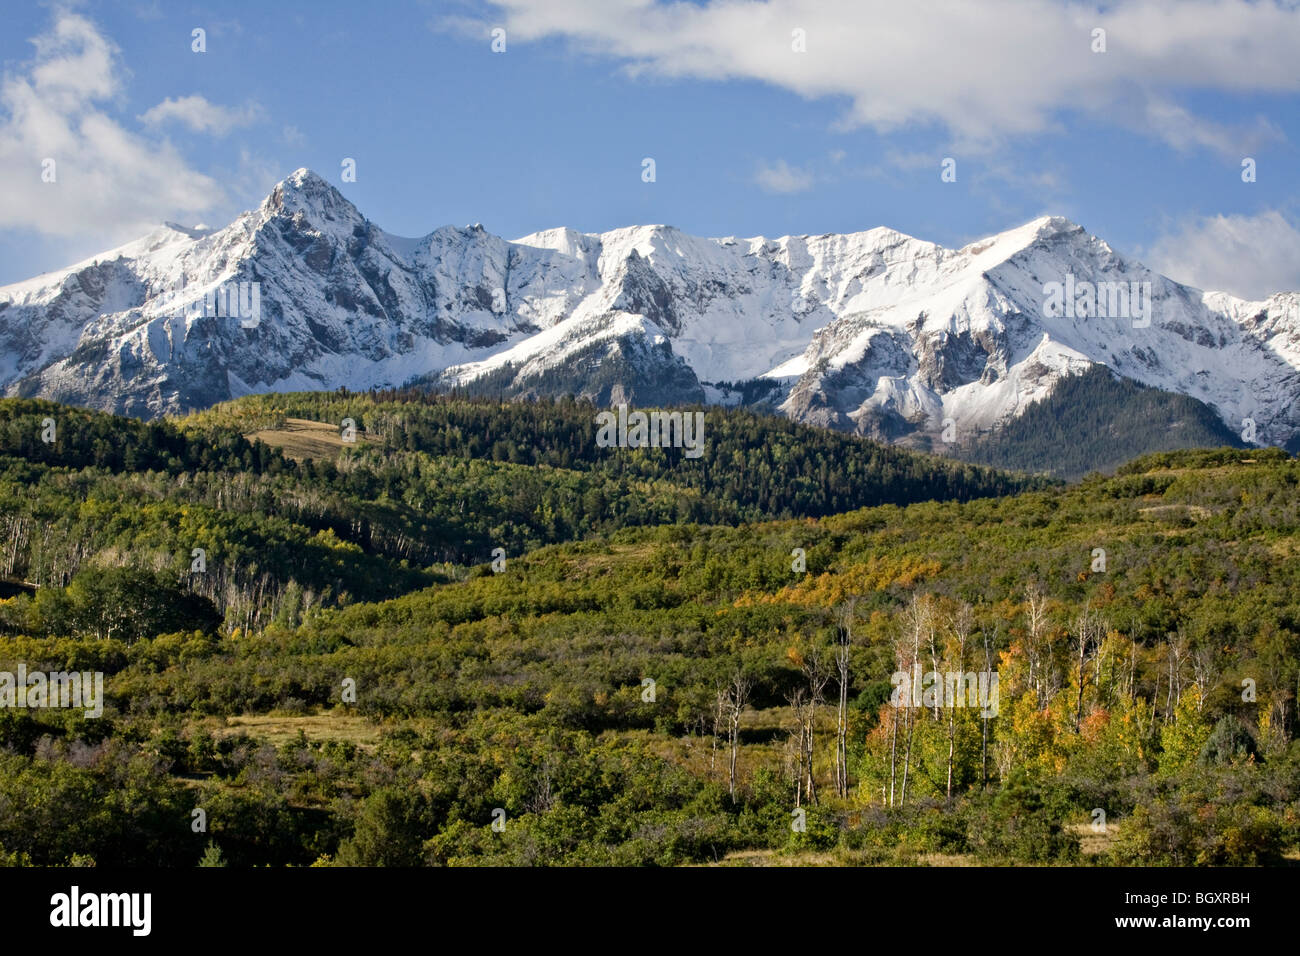 Snow covers Mt. Sneffels and surrounding peaks in the Mt. Sneffels Wilderness area near Dallas Divide Stock Photo